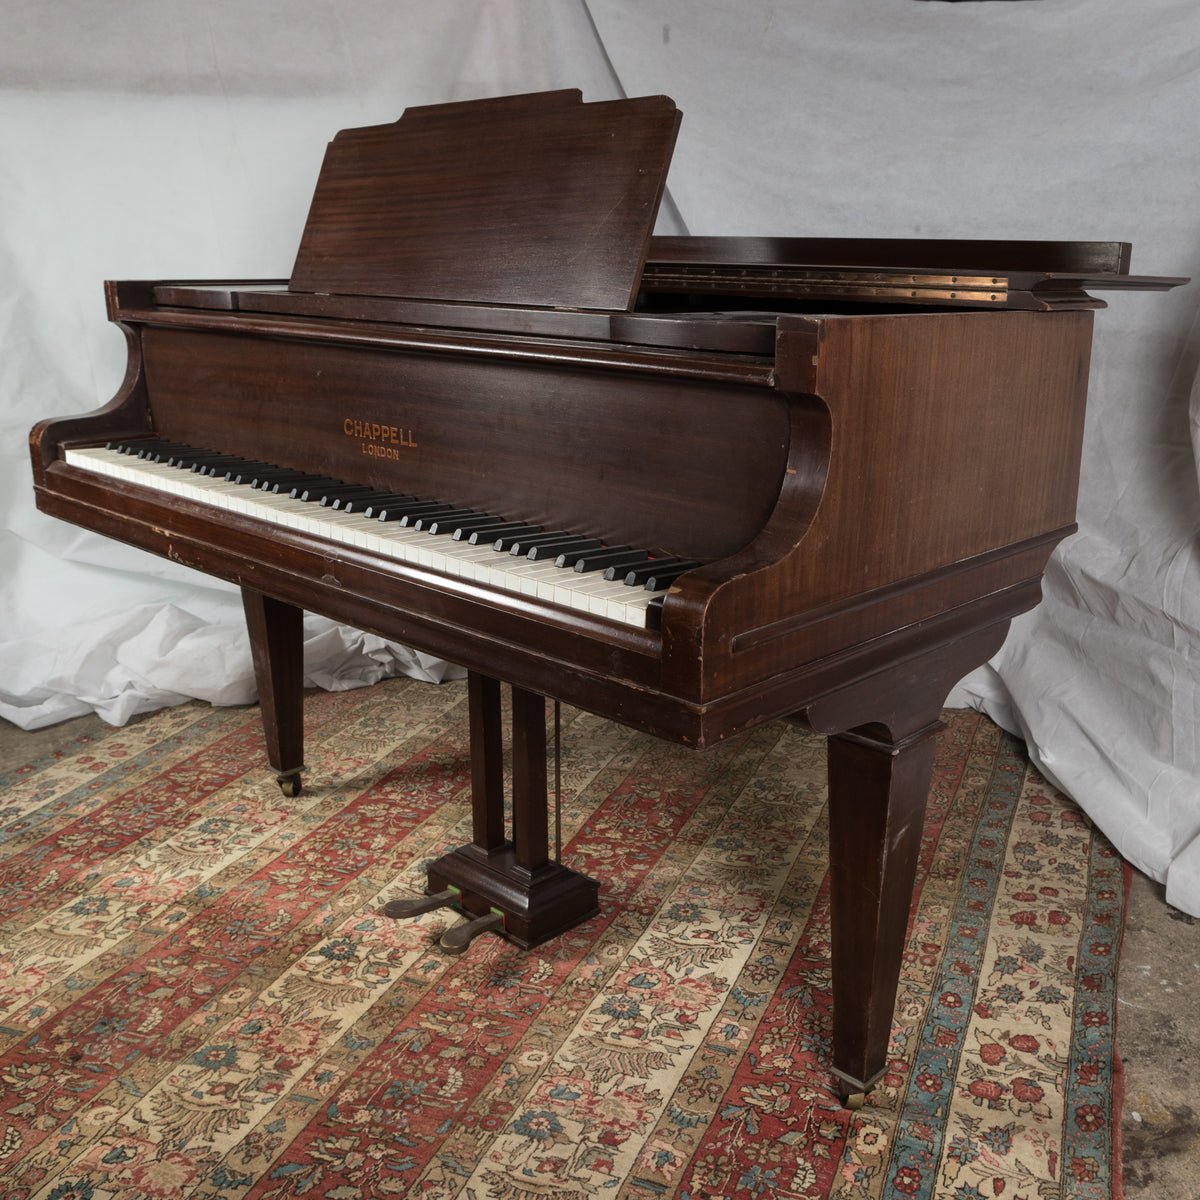 Reclaimed Chappell Baby Grand Piano in Mahogany Circa 1930 | The Architectural Forum